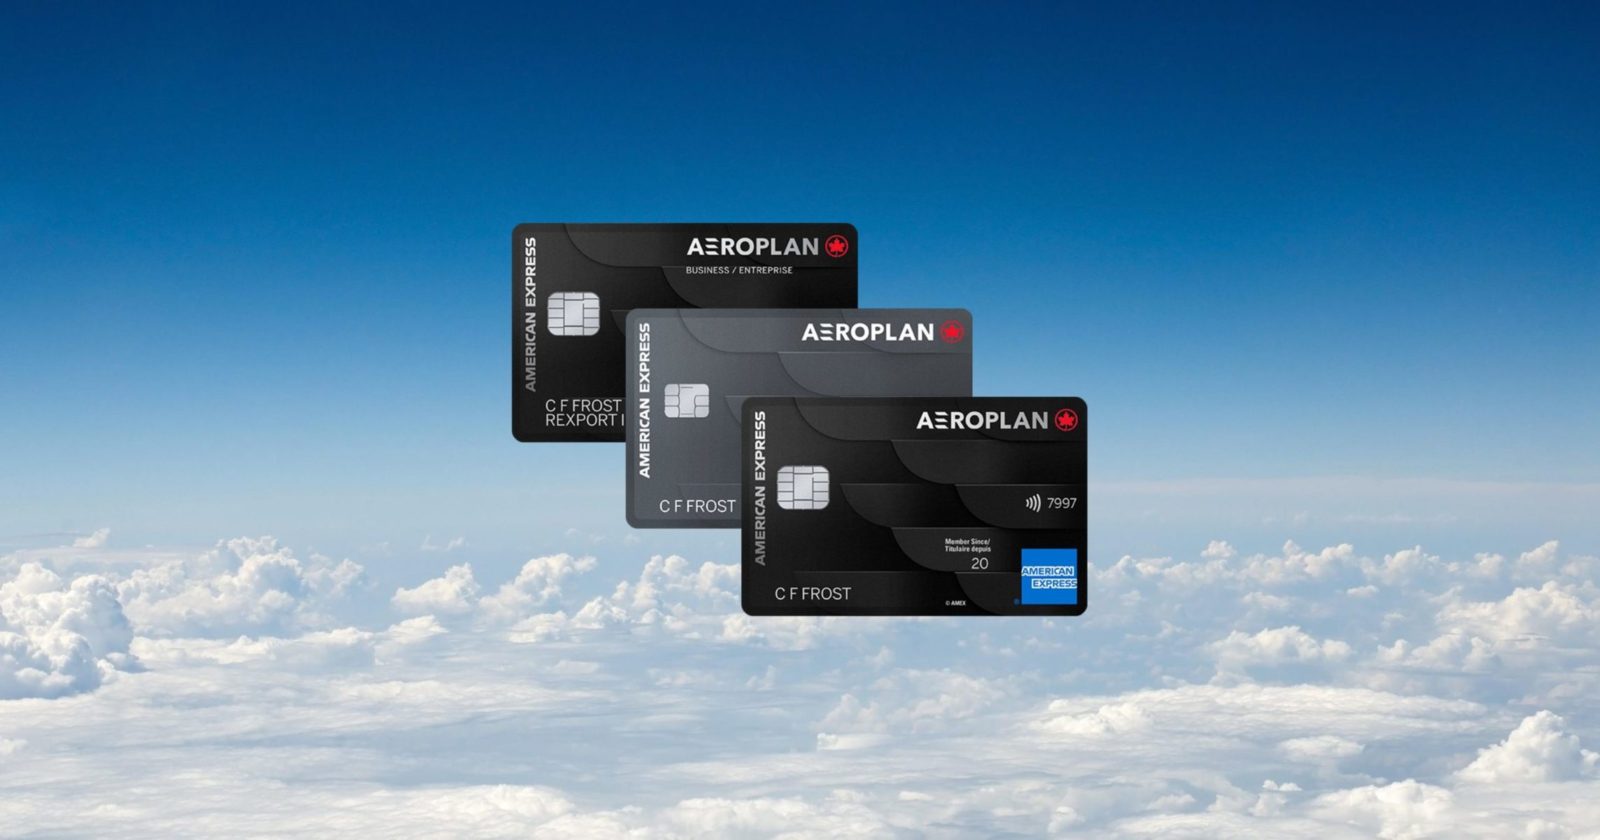 New Aeroplan Cards Featured